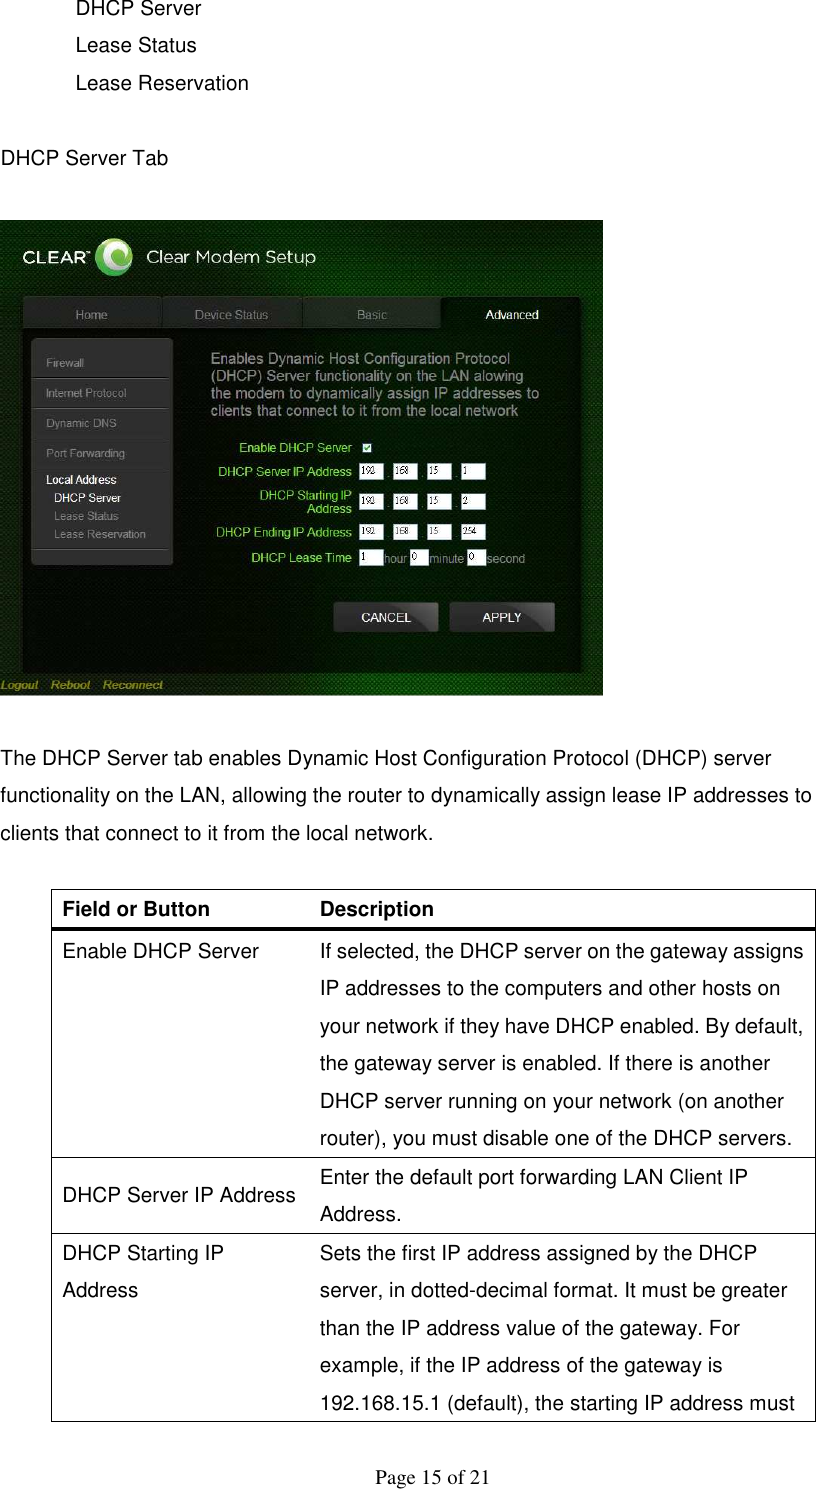  Page 15 of 21 DHCP Server Lease Status Lease Reservation  DHCP Server Tab    The DHCP Server tab enables Dynamic Host Configuration Protocol (DHCP) server functionality on the LAN, allowing the router to dynamically assign lease IP addresses to clients that connect to it from the local network.  Field or Button   Description   Enable DHCP Server    If selected, the DHCP server on the gateway assigns IP addresses to the computers and other hosts on your network if they have DHCP enabled. By default, the gateway server is enabled. If there is another DHCP server running on your network (on another router), you must disable one of the DHCP servers.  DHCP Server IP Address  Enter the default port forwarding LAN Client IP Address.   DHCP Starting IP Address   Sets the first IP address assigned by the DHCP server, in dotted-decimal format. It must be greater than the IP address value of the gateway. For example, if the IP address of the gateway is 192.168.15.1 (default), the starting IP address must 